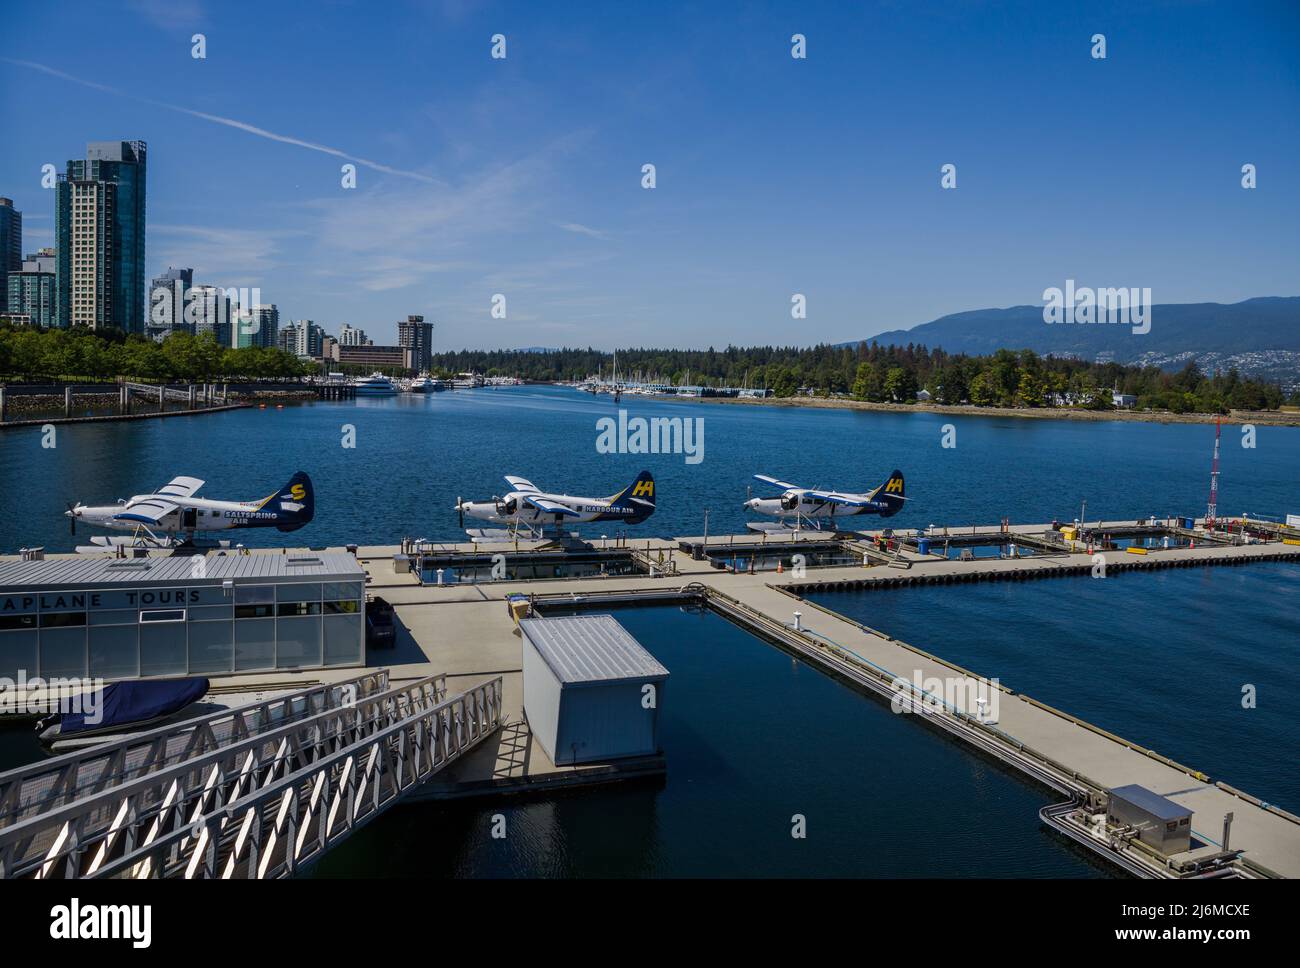 Vancouver, British Colambia - 16.08.2021 - Downtown water plane airport. Three planes staying in water. Stanley nature park background. Stock Photo